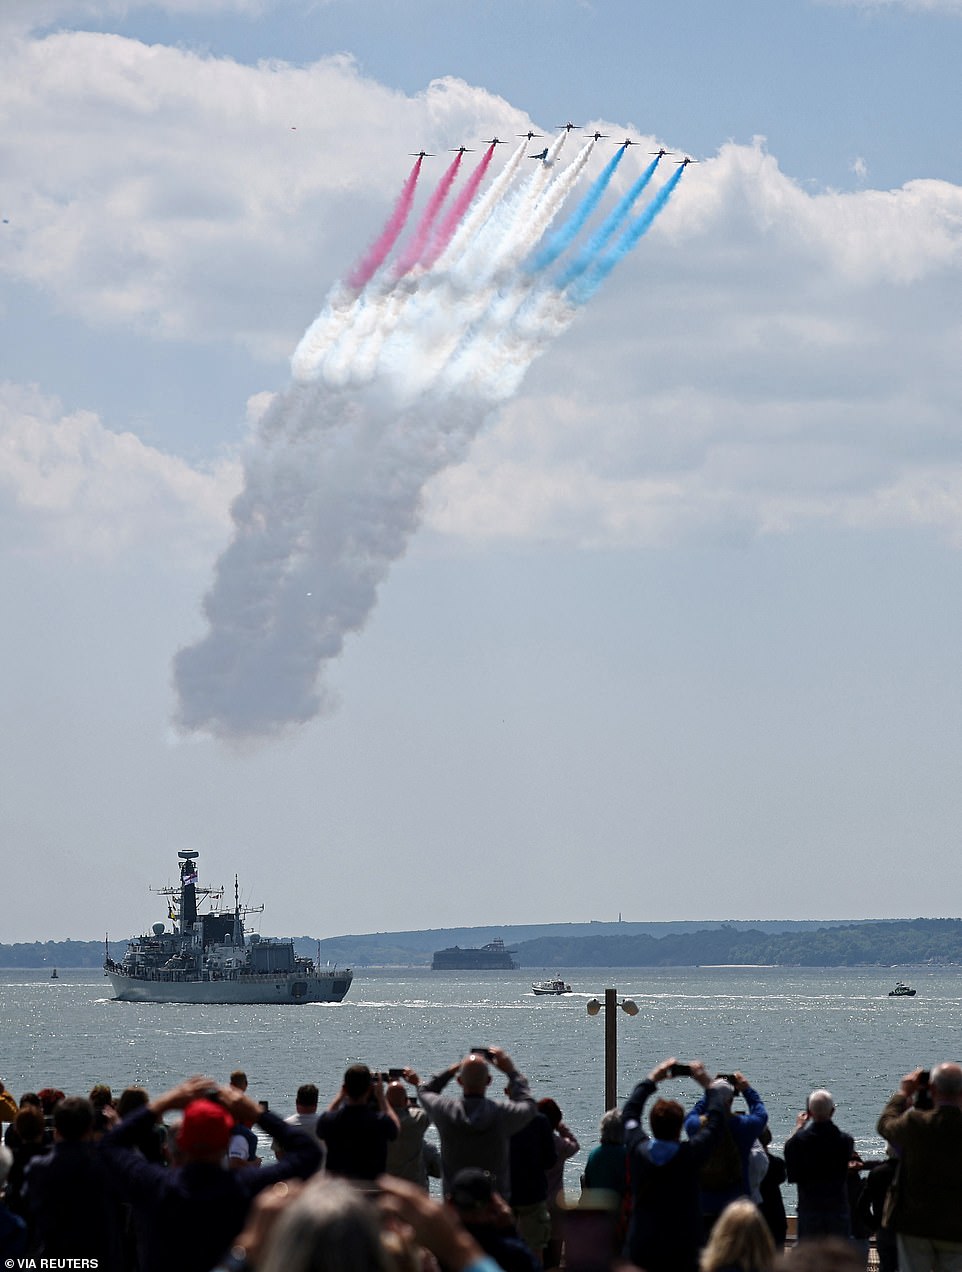 Members of the public watch as the Red Arrows perform a flypast above HMS St Albans, a Type 23 Frigate